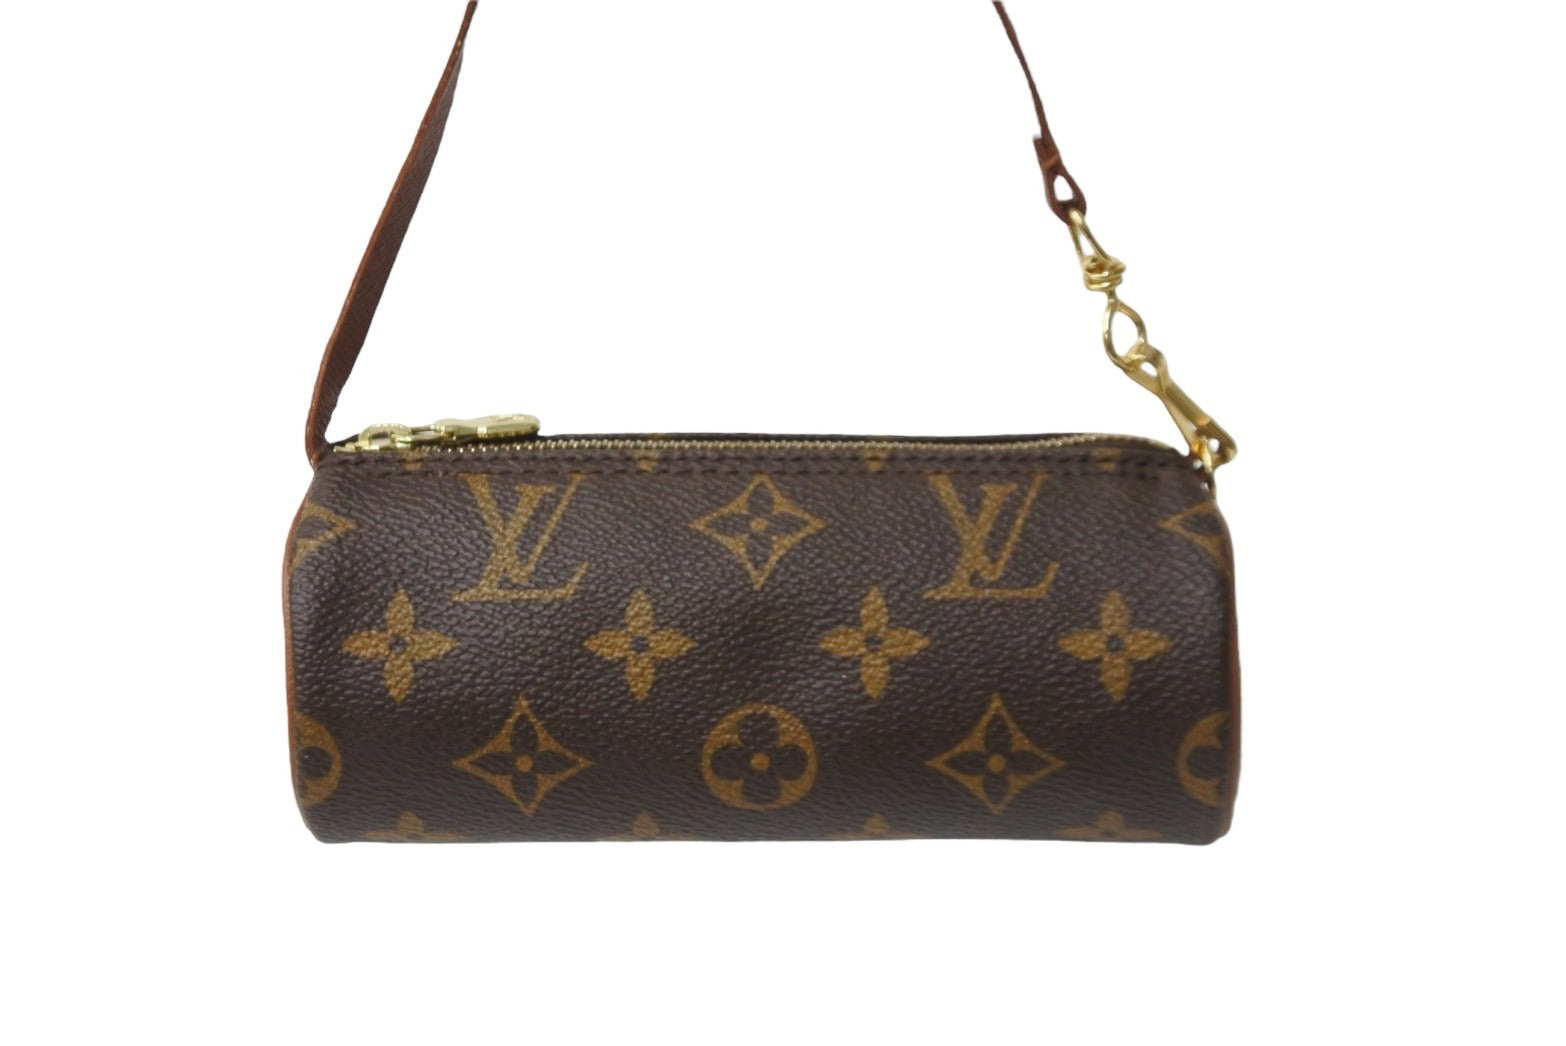 LOUIS VUITTON ルイヴィトン ポーチ ブラウン パピヨン 付属ポーチ 